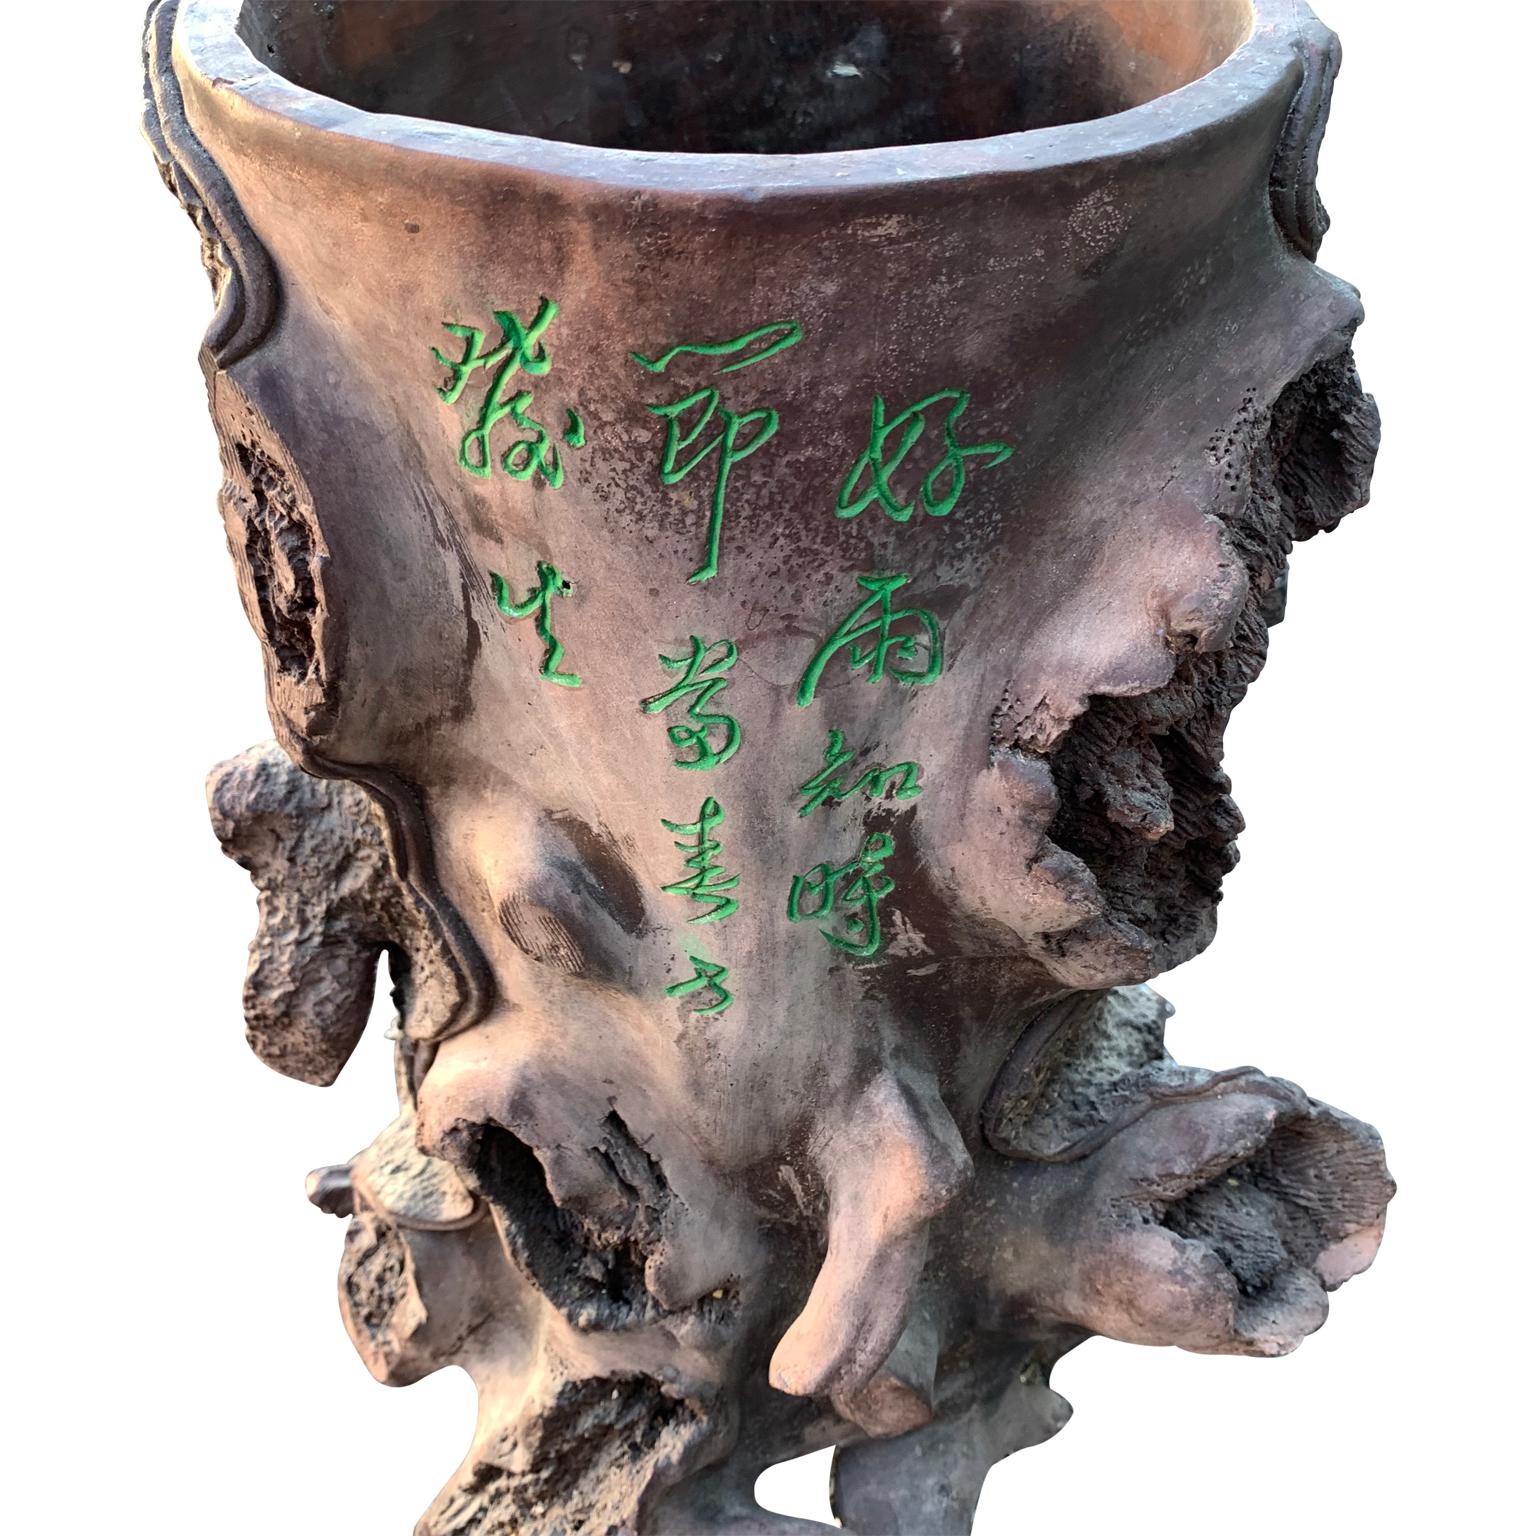 Hand-Crafted Ceramic Faux Bois Tree Trunk Planter Or Jardinière